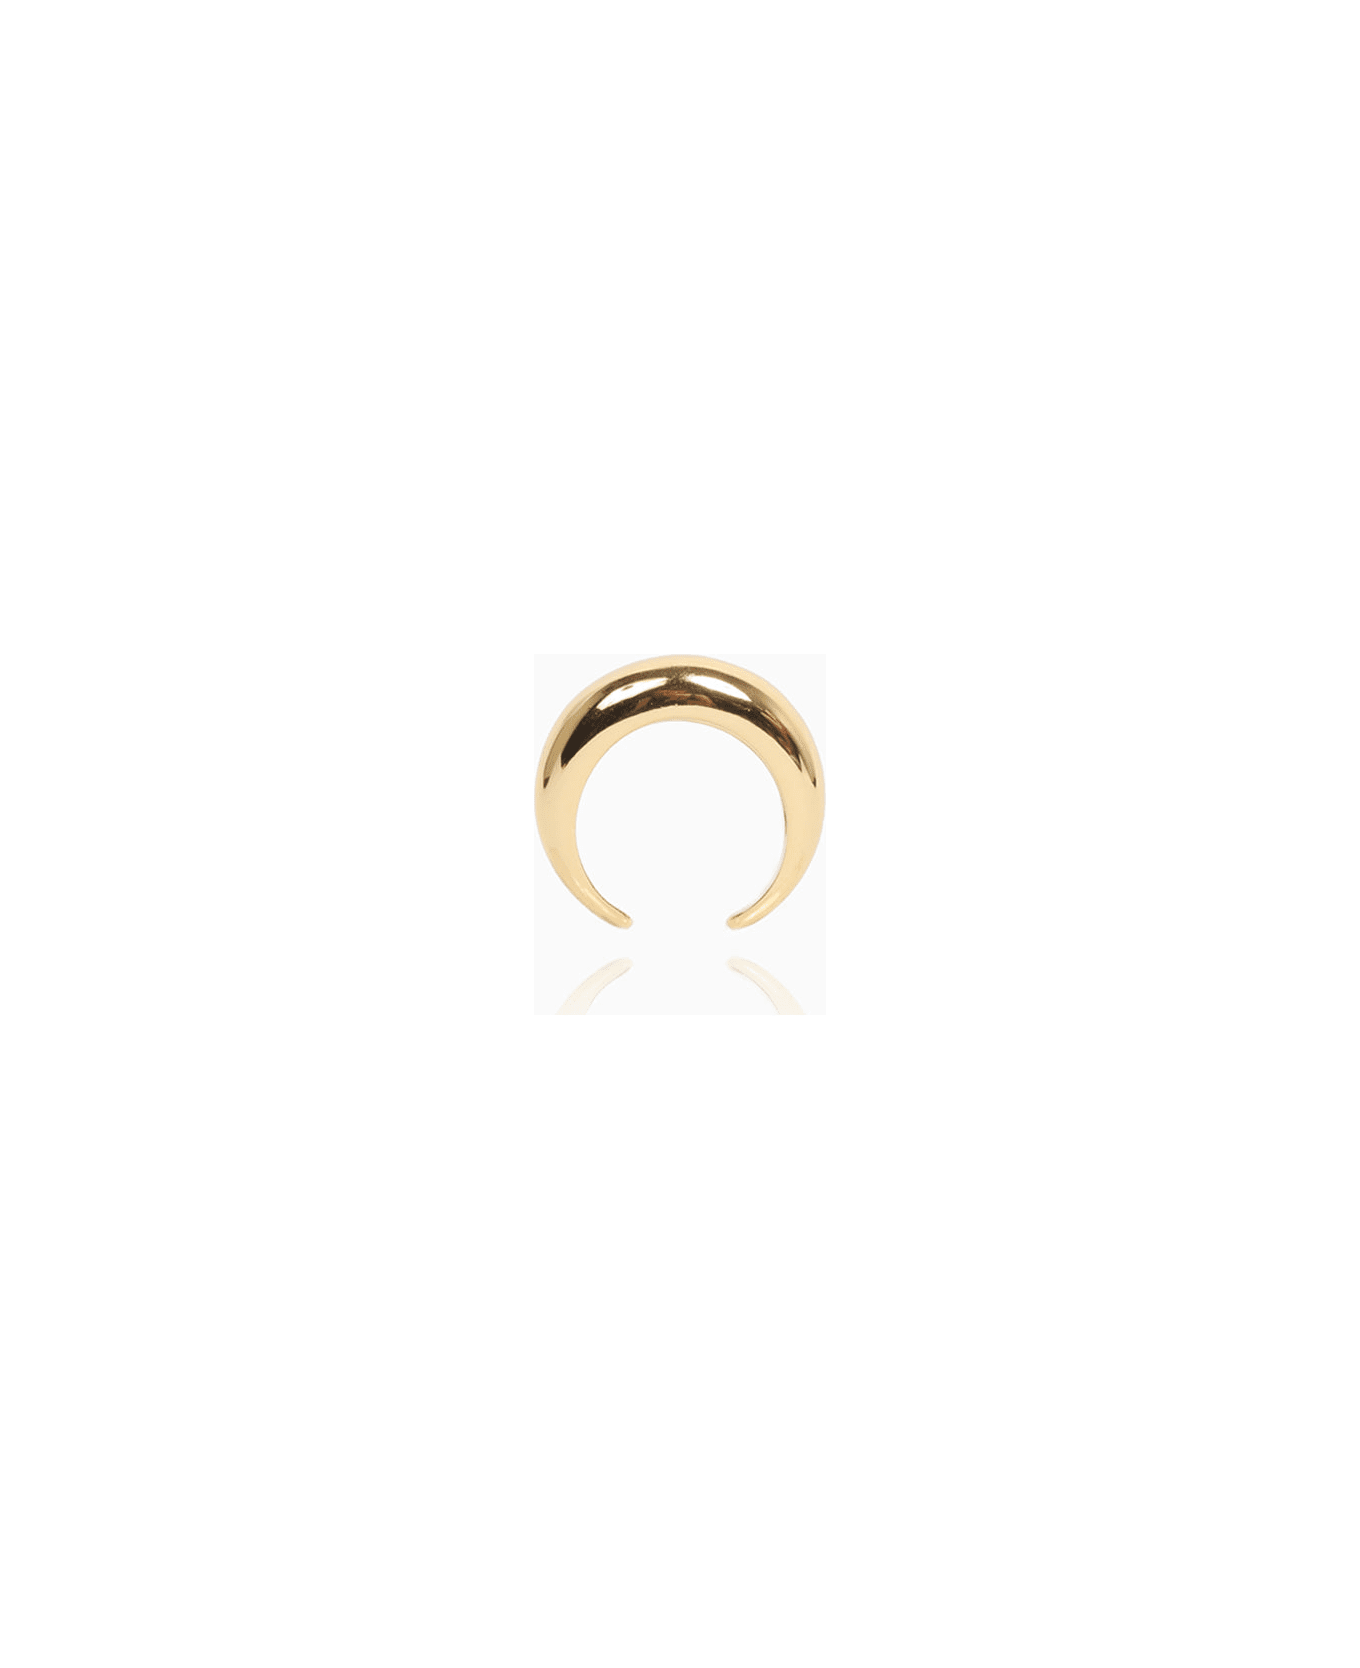 Federica Tosi Ring Stone Gold - GOLD